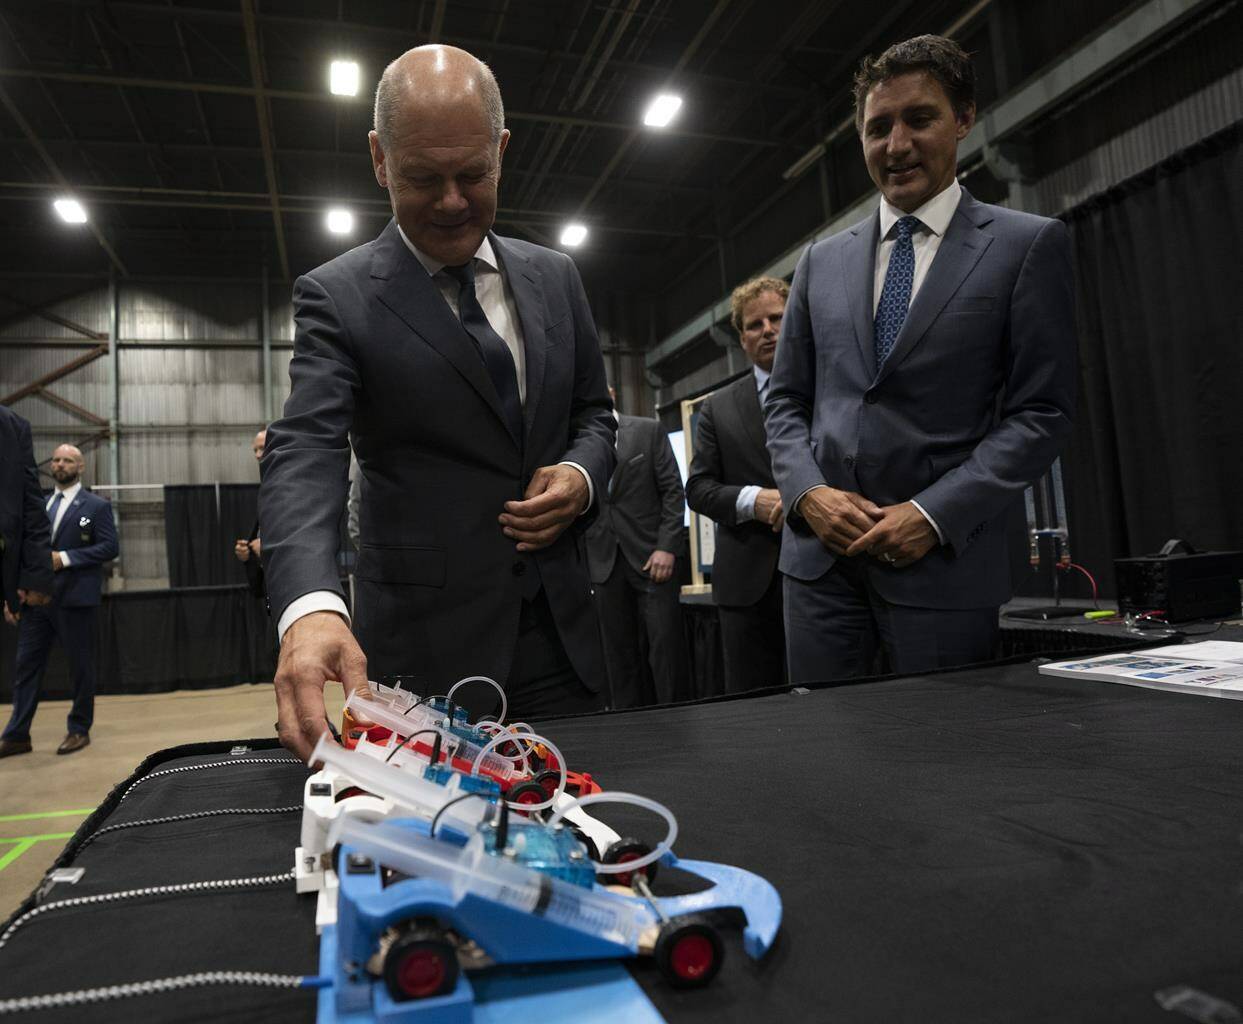 Canadian Prime Minister Justin Trudeau looks on as German Chancellor Olaf Scholz examines a hydrogen powered model car as they tour a trade show, Tuesday, August 23, 2022 in Stephenville, Newfoundland and Labrador. THE CANADIAN PRESS/Adrian Wyld